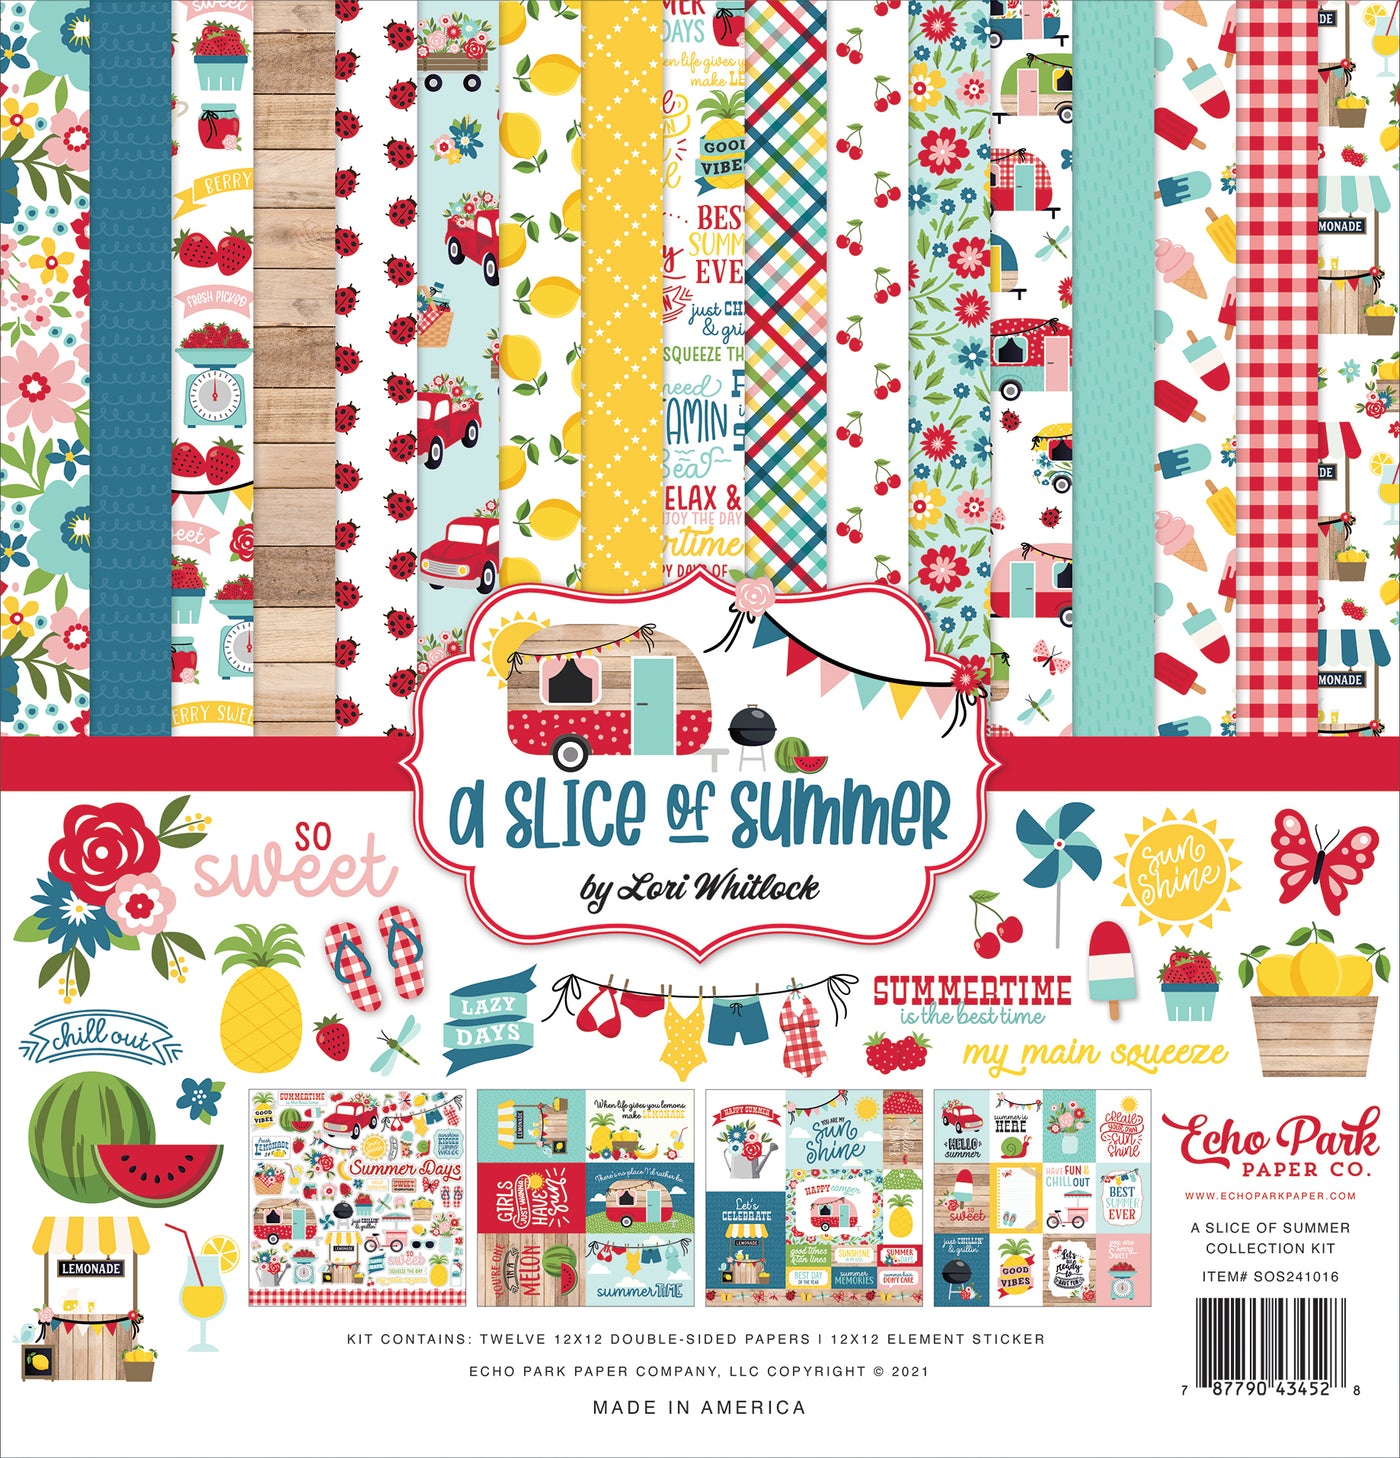 Twelve double-sided papers with delightful designs focused on summer fun, lemonade, and travel. 12x12 inch textured cardstock; includes Element Sticker Sheet.